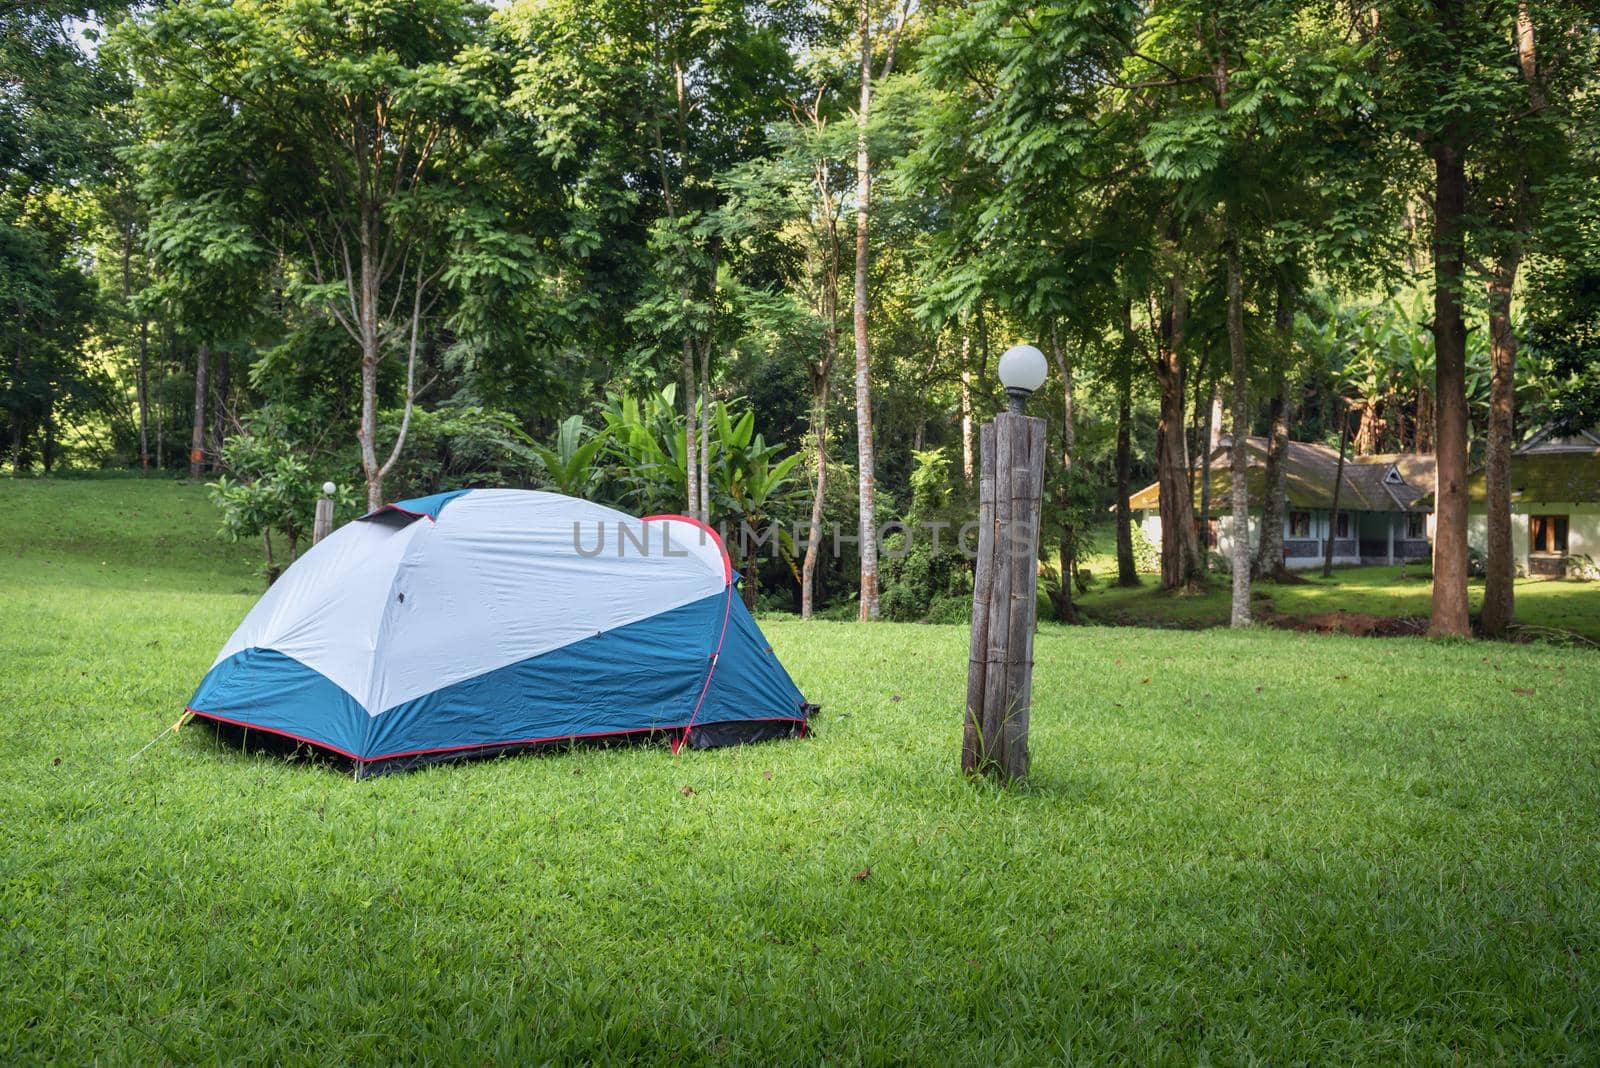 Camping Campsite and Tent on Green Grass Under The Trees Tropical Forest, Field Campground for Vacation Outdoors Leisure Activity and Adventure. Backpack Trekking Tourist Lifestyles, Travel Adventures